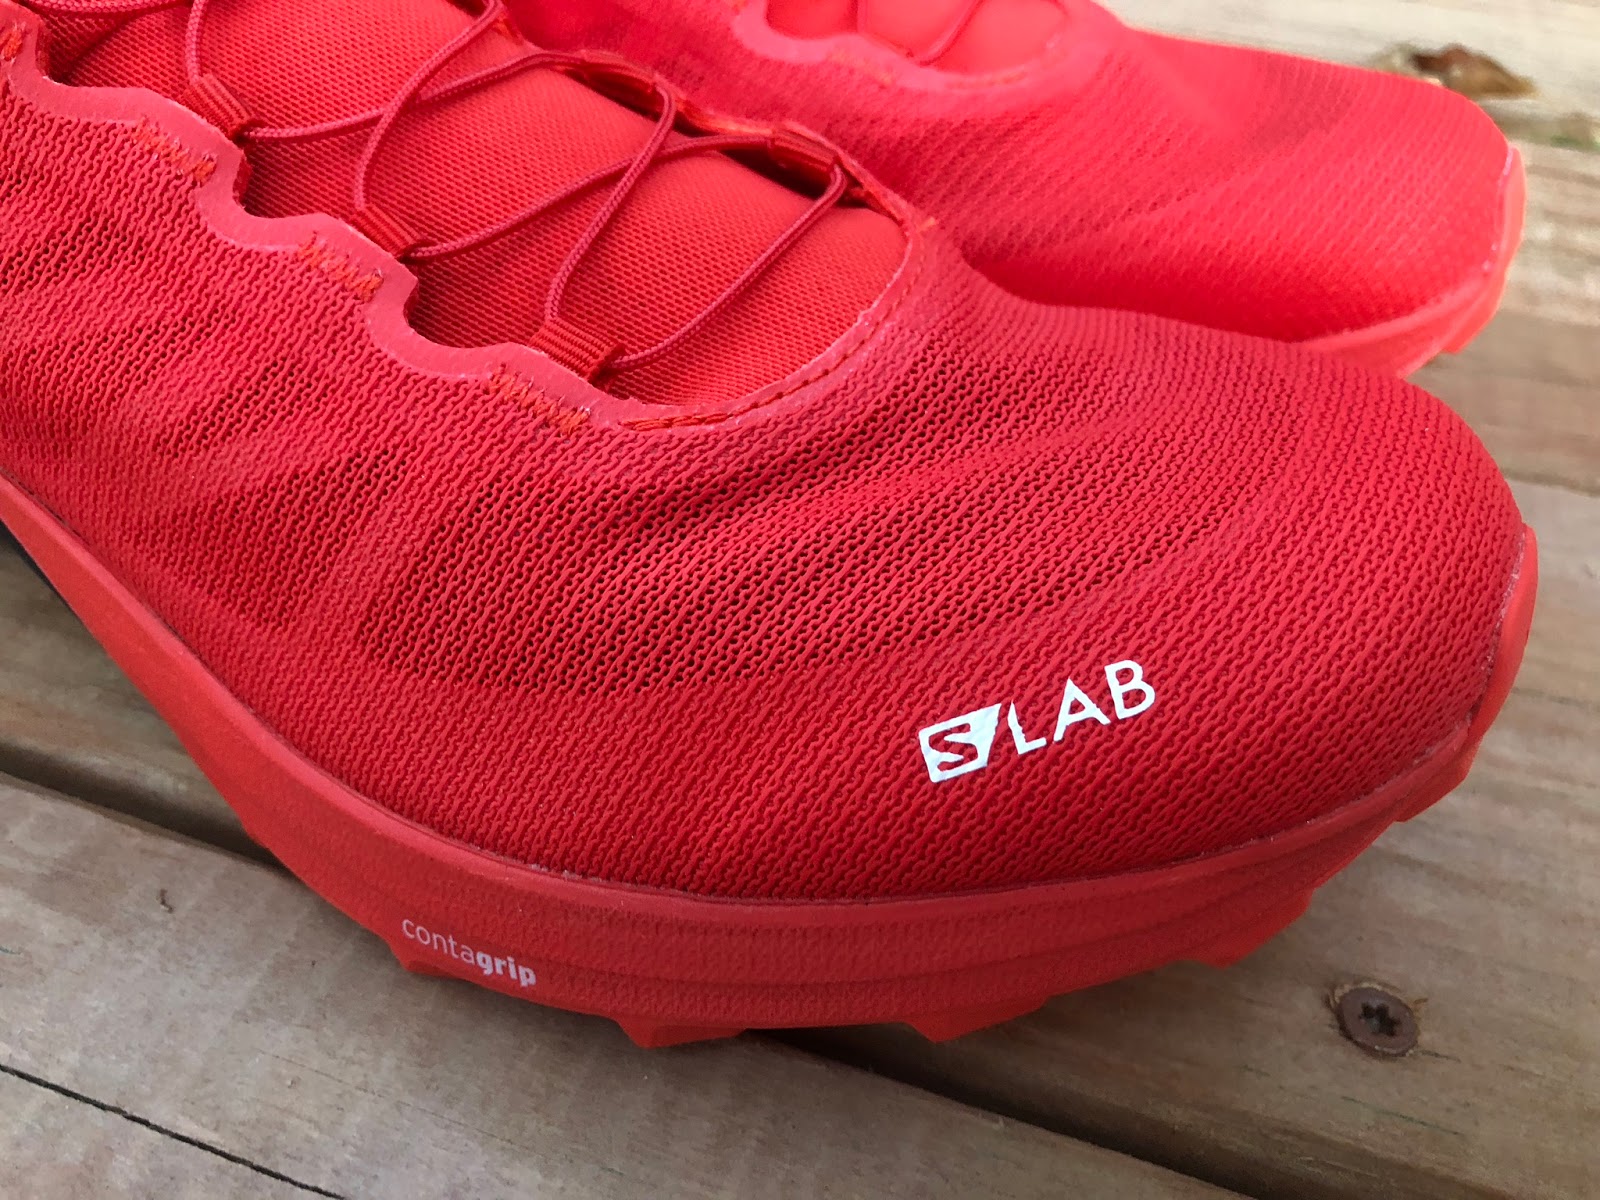 Seaboard Polar hjemme Road Trail Run: Salomon S/Lab Sense 7 SG Review - Ultralight, Screaming  Fast and Protective Race Rocket